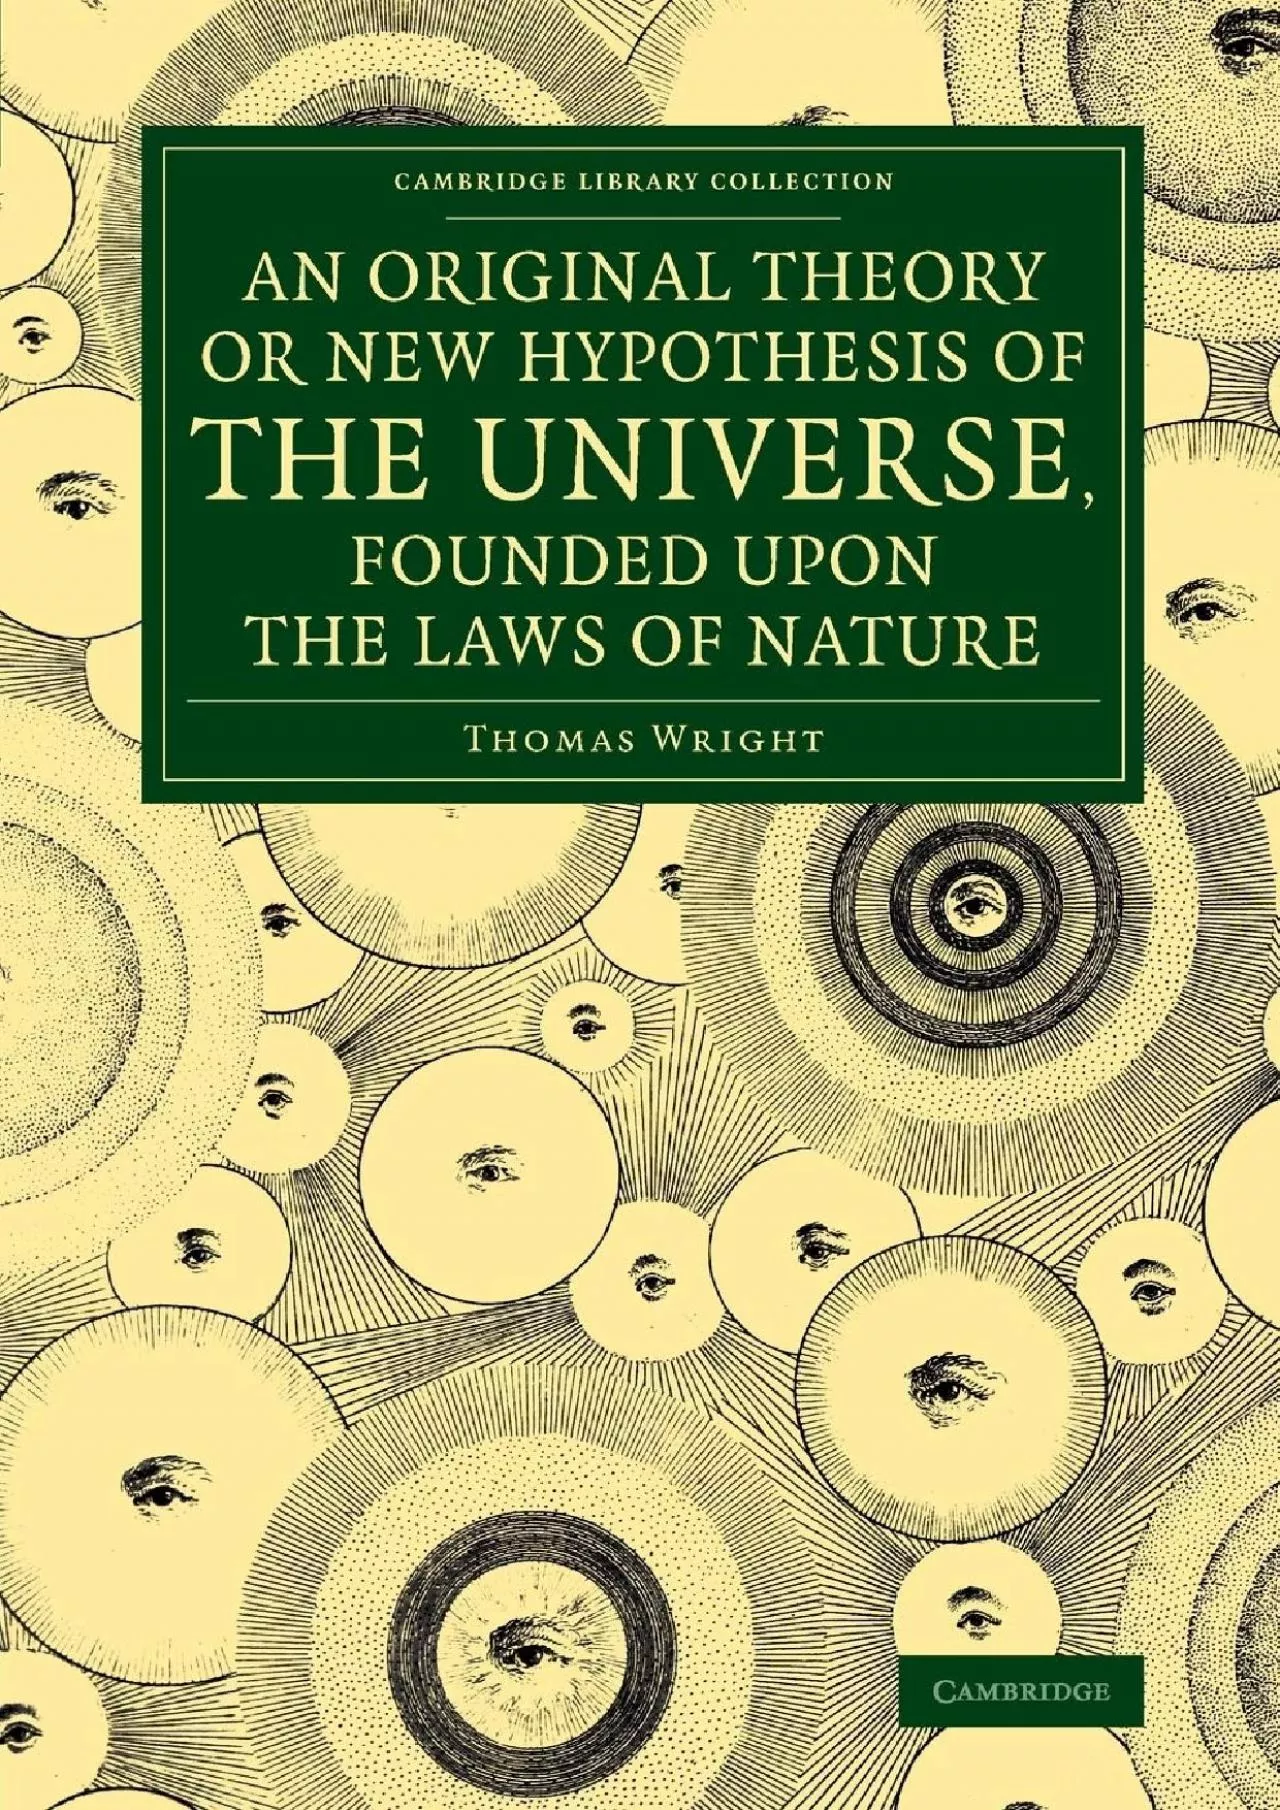 (DOWNLOAD)-An Original Theory or New Hypothesis of the Universe, Founded upon the Laws